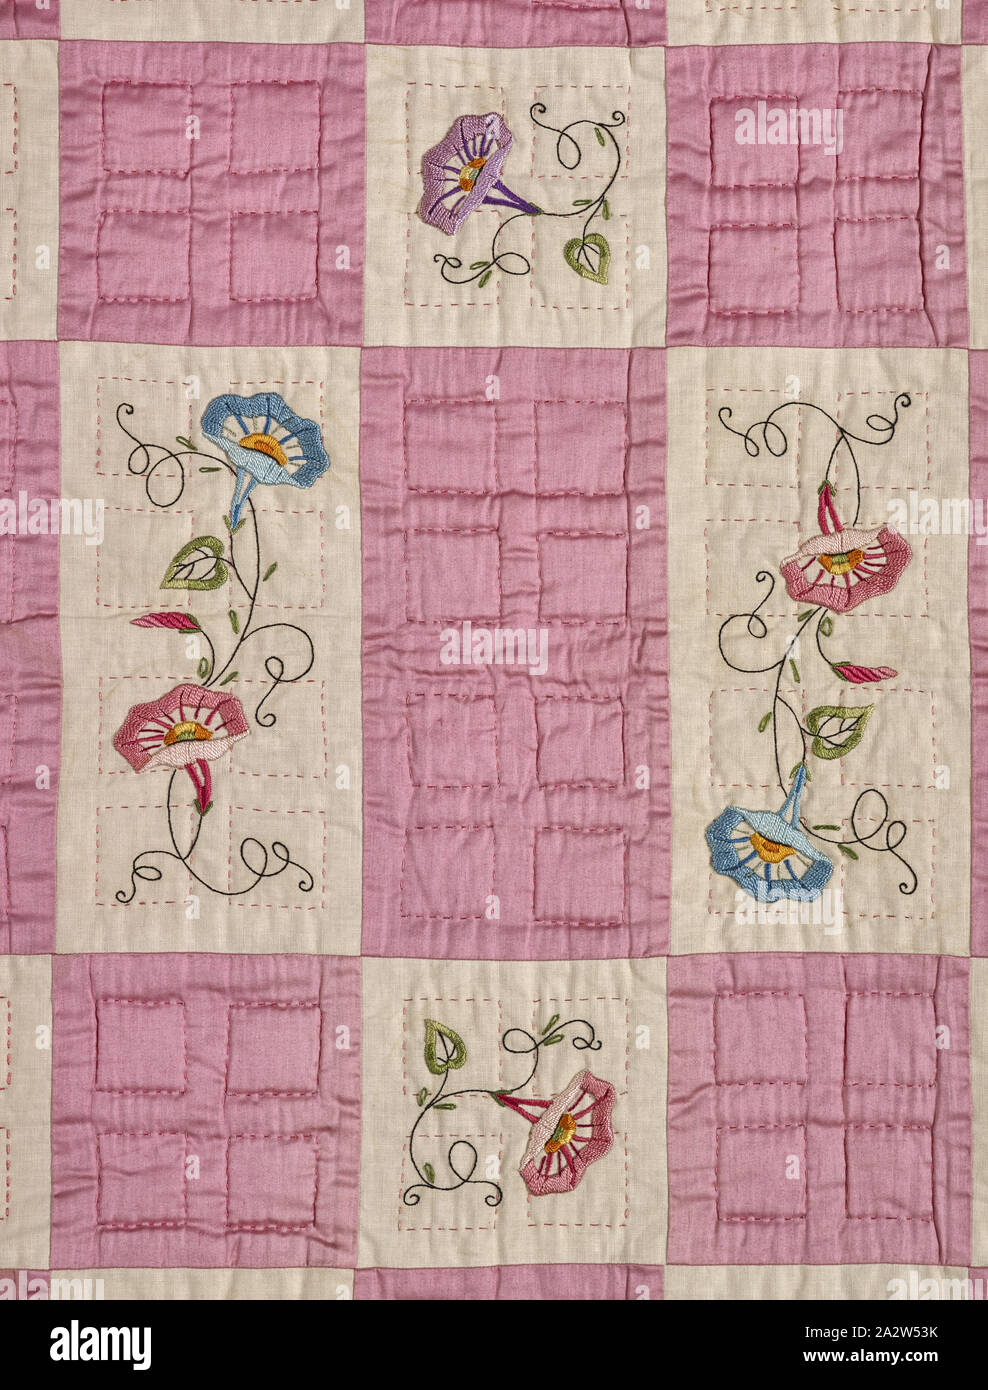 quilt, Christine Miller Bauer (American, born German, about 1865-1946), Mabel Bauer (American, about 1892-1953), about 1930, cotton, pieced, embroidered, and quilted, 84-1/2 x 70-1/2 in., Textile and Fashion Arts Stock Photo